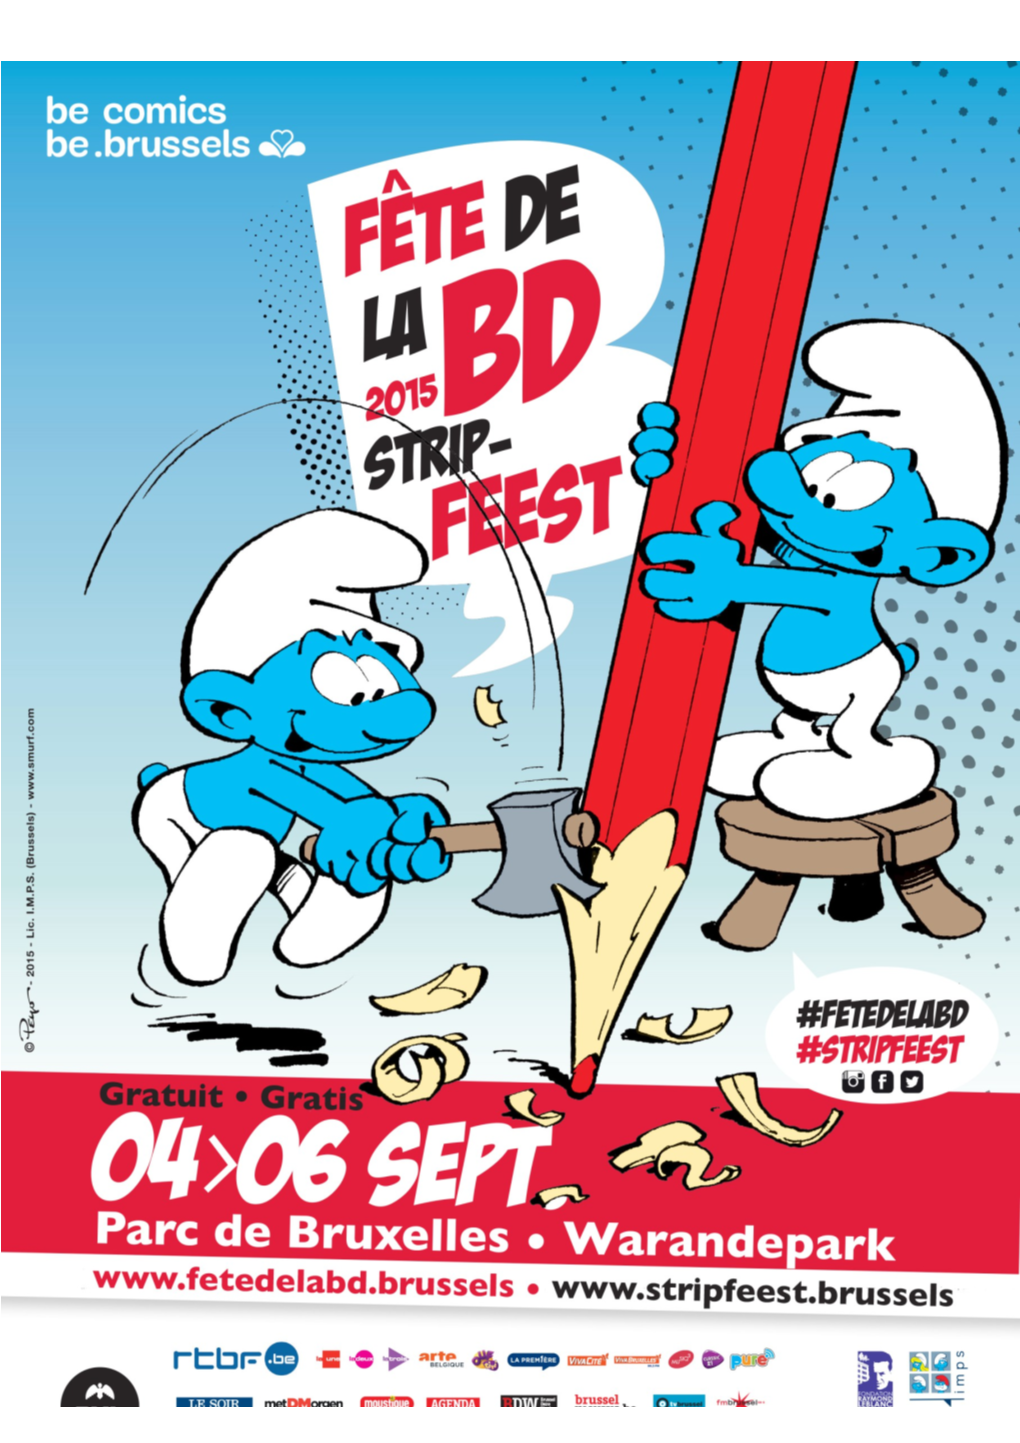 This Year Brussels Hosts the Sixth Comic Strip Festival!